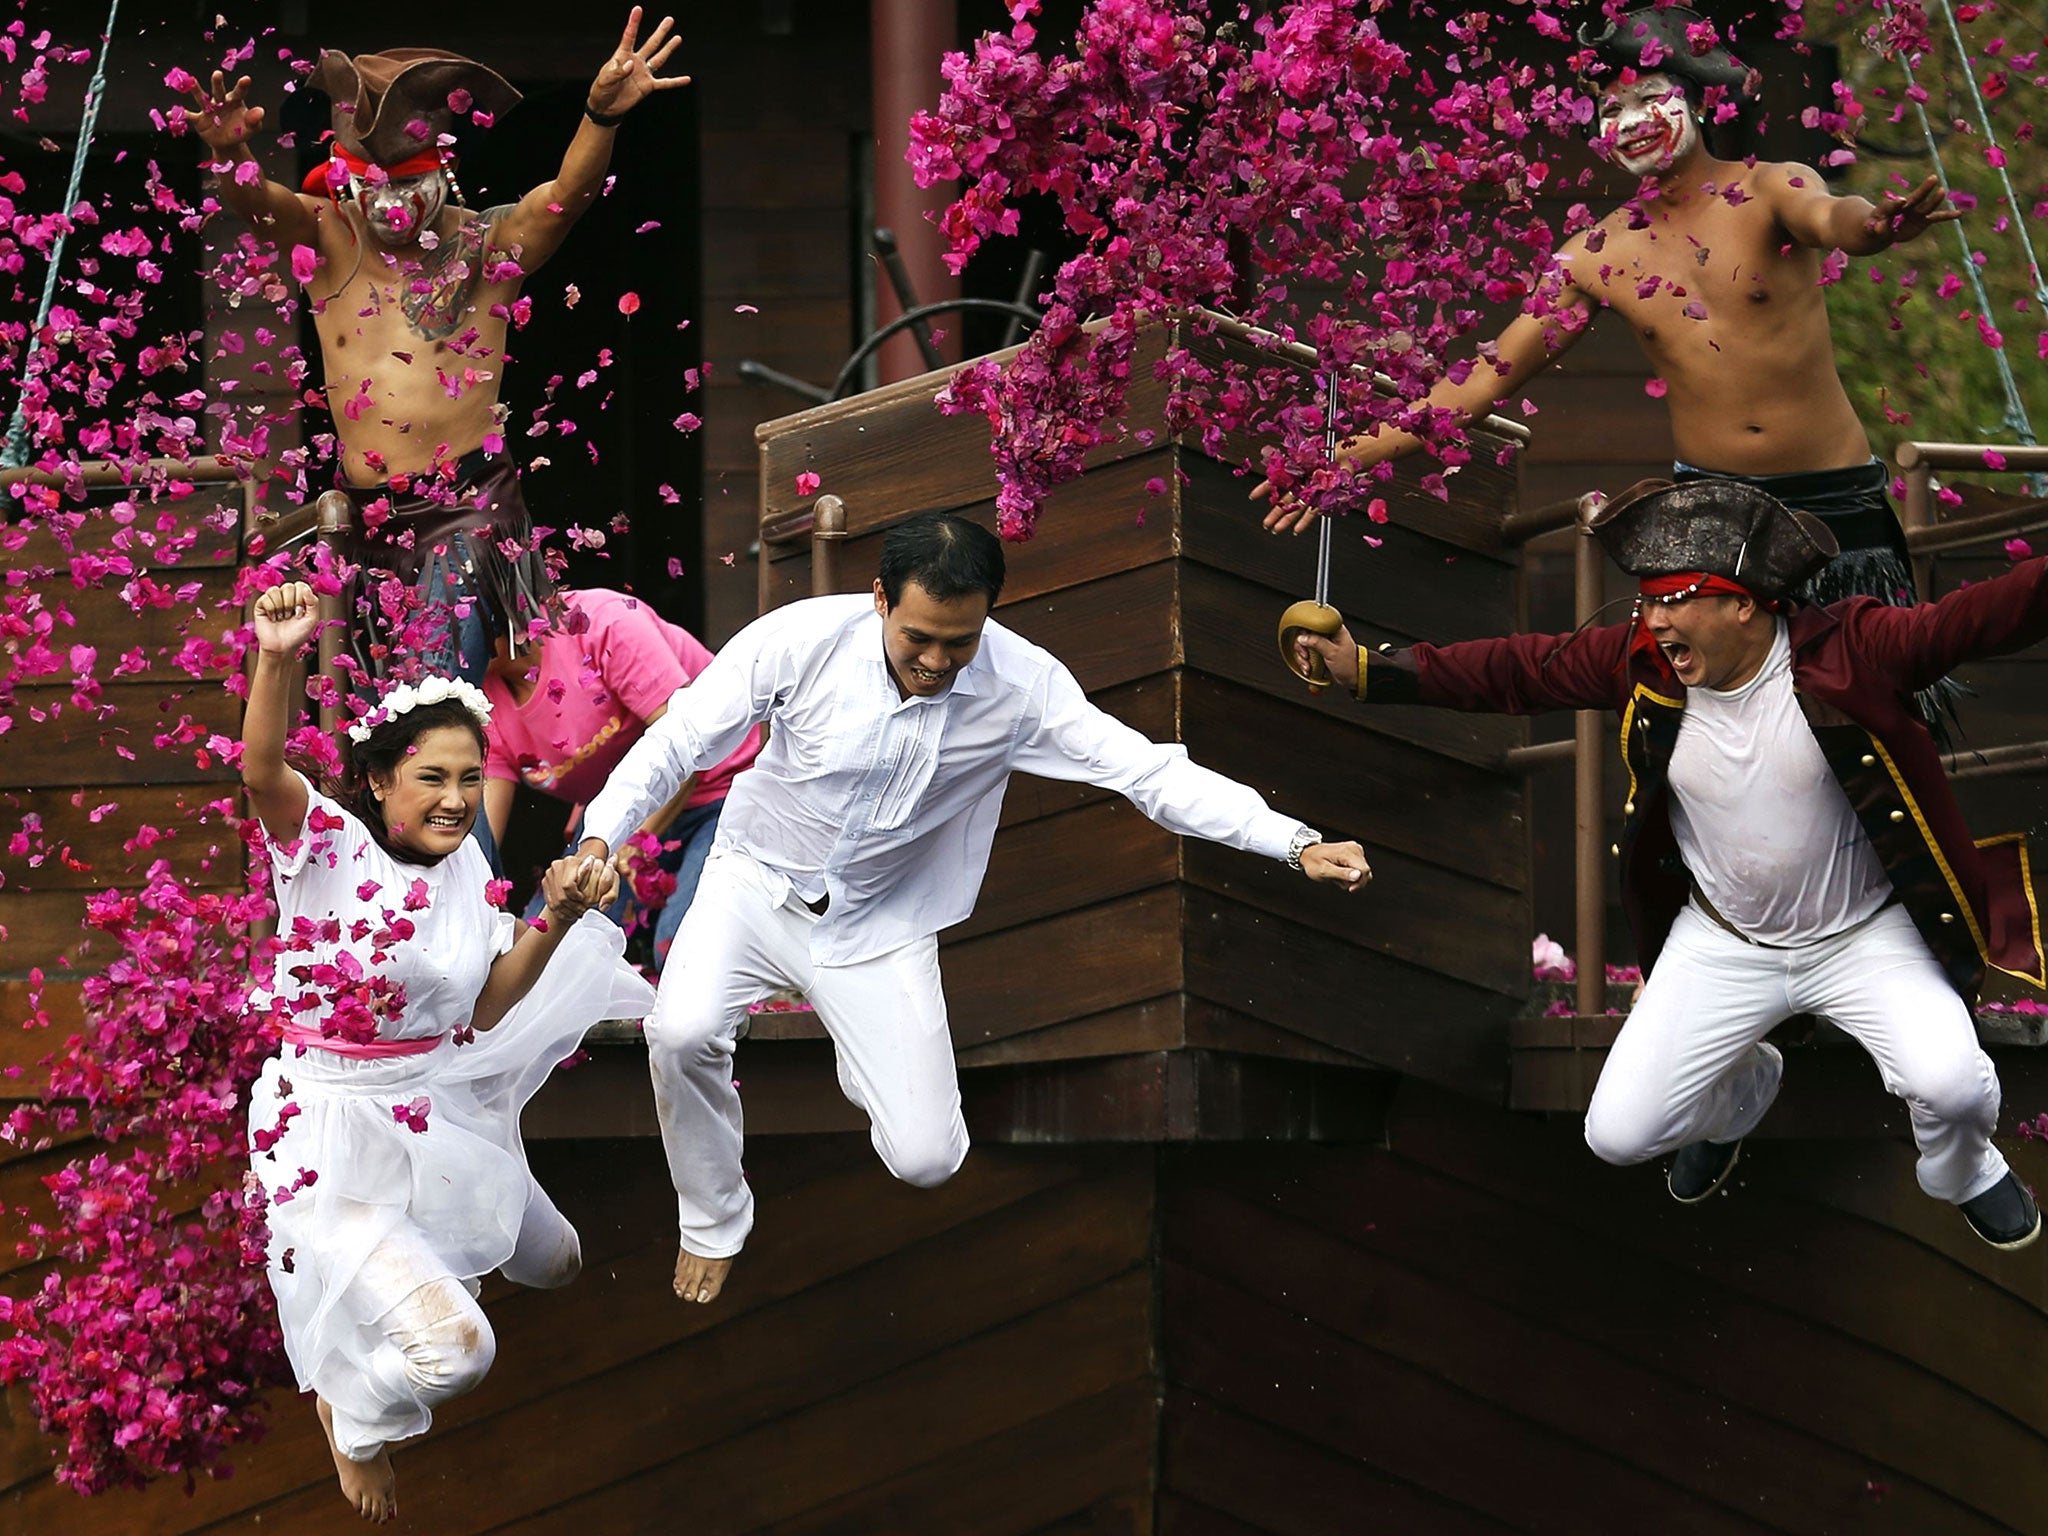 Groom Roongroj Walailuk and bride Vina Wichan jump into the pond as they are chased by men dressed as pirates during a wedding ceremony ahead of Valentine's Day in Prachin Buri province